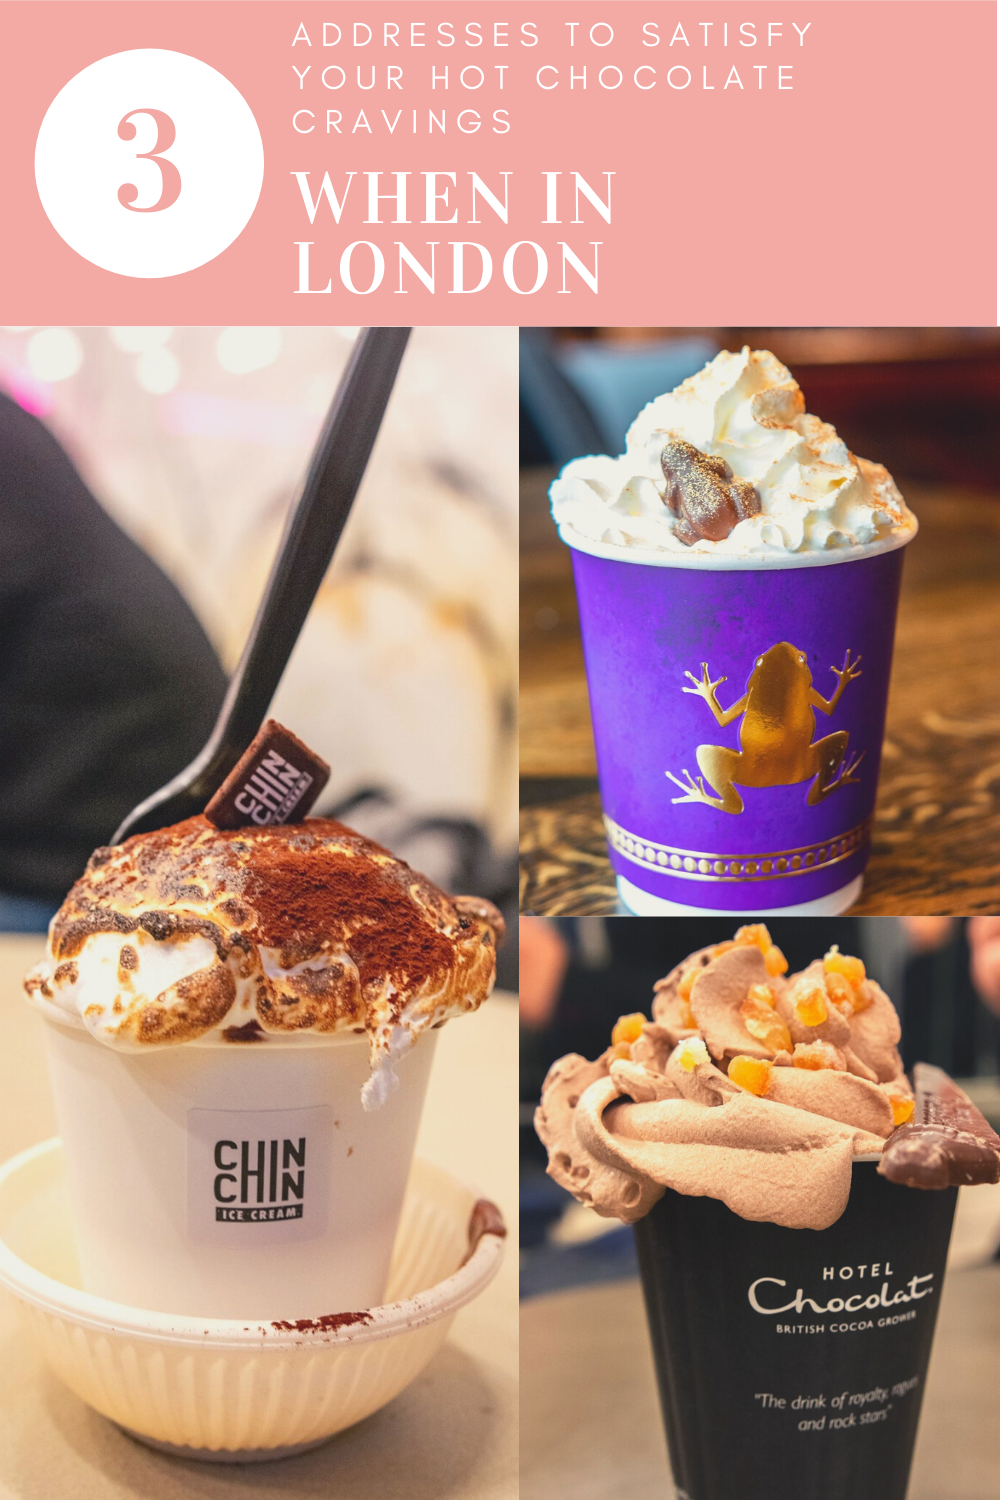 Three addresses to satisfy your hot chocolate cravings when in London